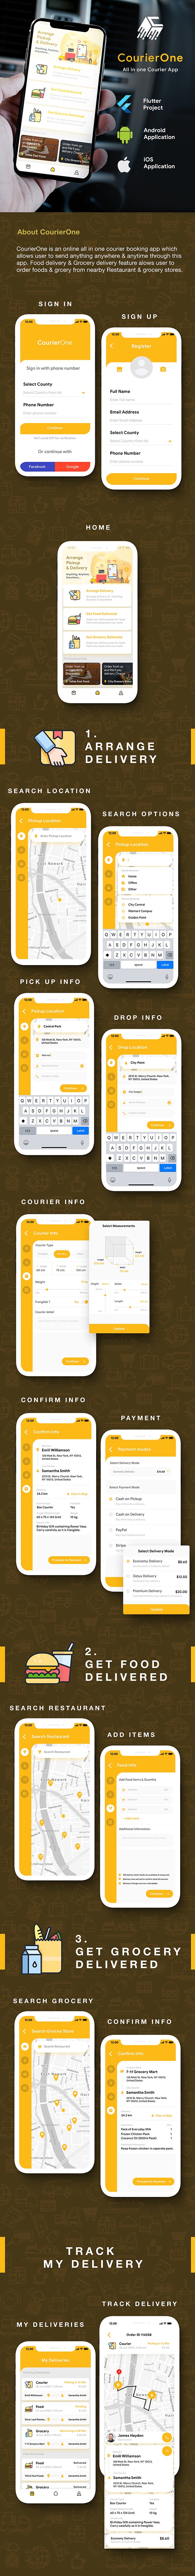 Courier Delivery App |Custom Courier App |2 Apps User App+Delivery App |Flutter Template|Courierone - 6